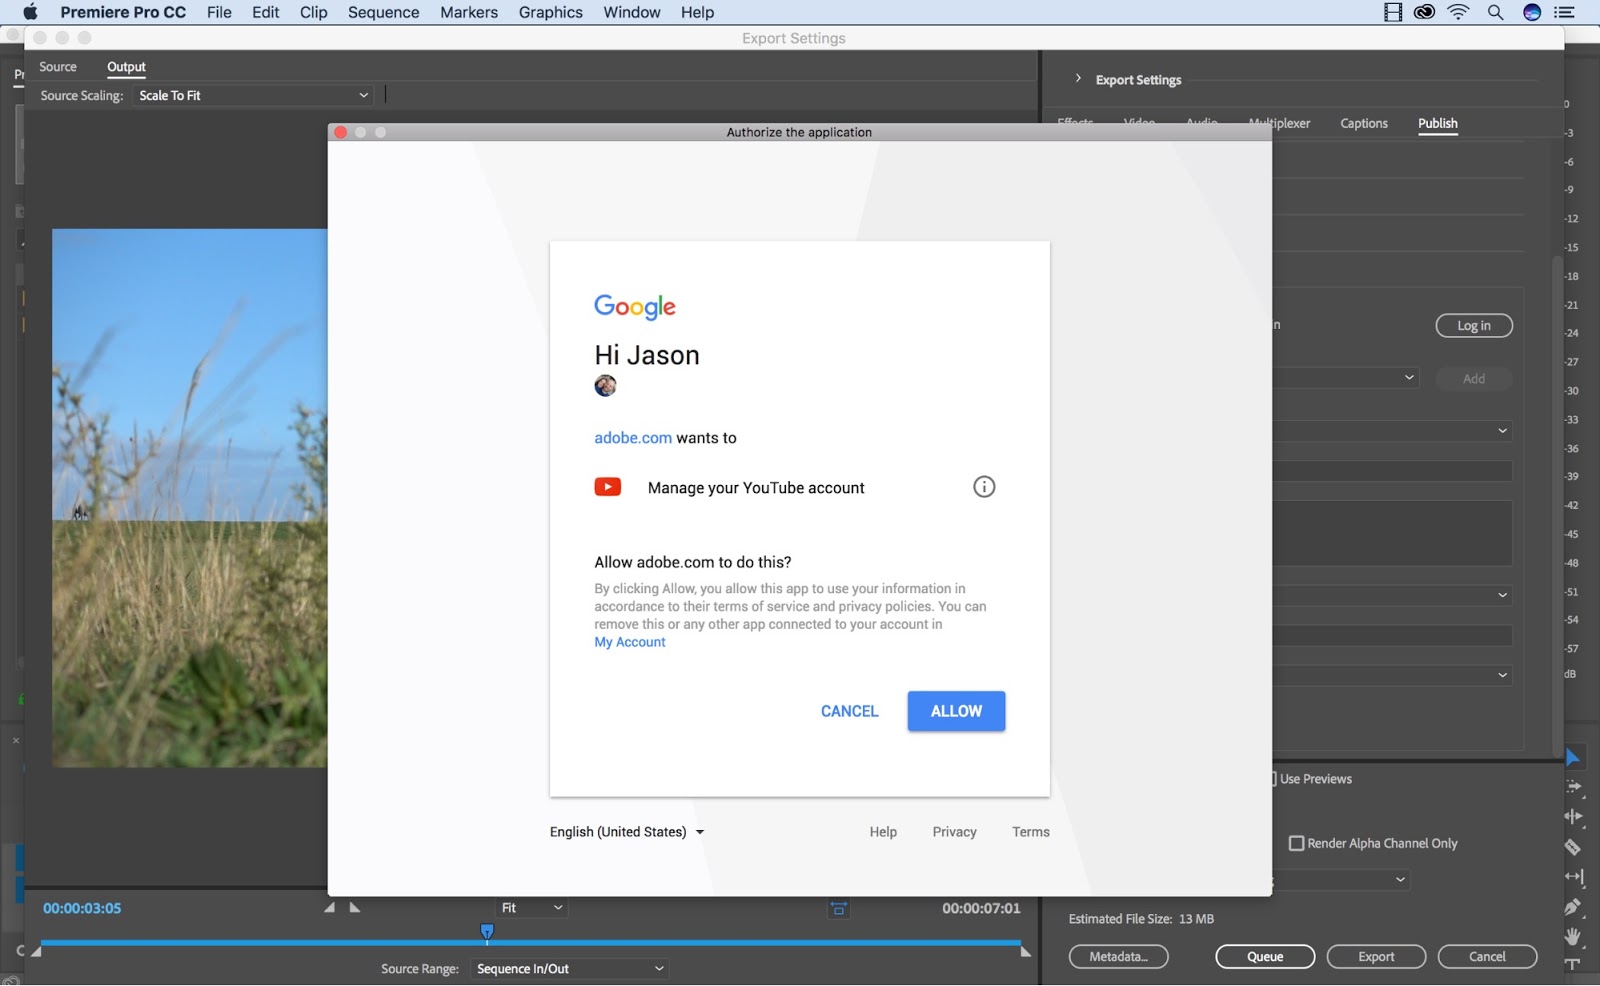 Authorizing Premiere Pro to access your YouTube account